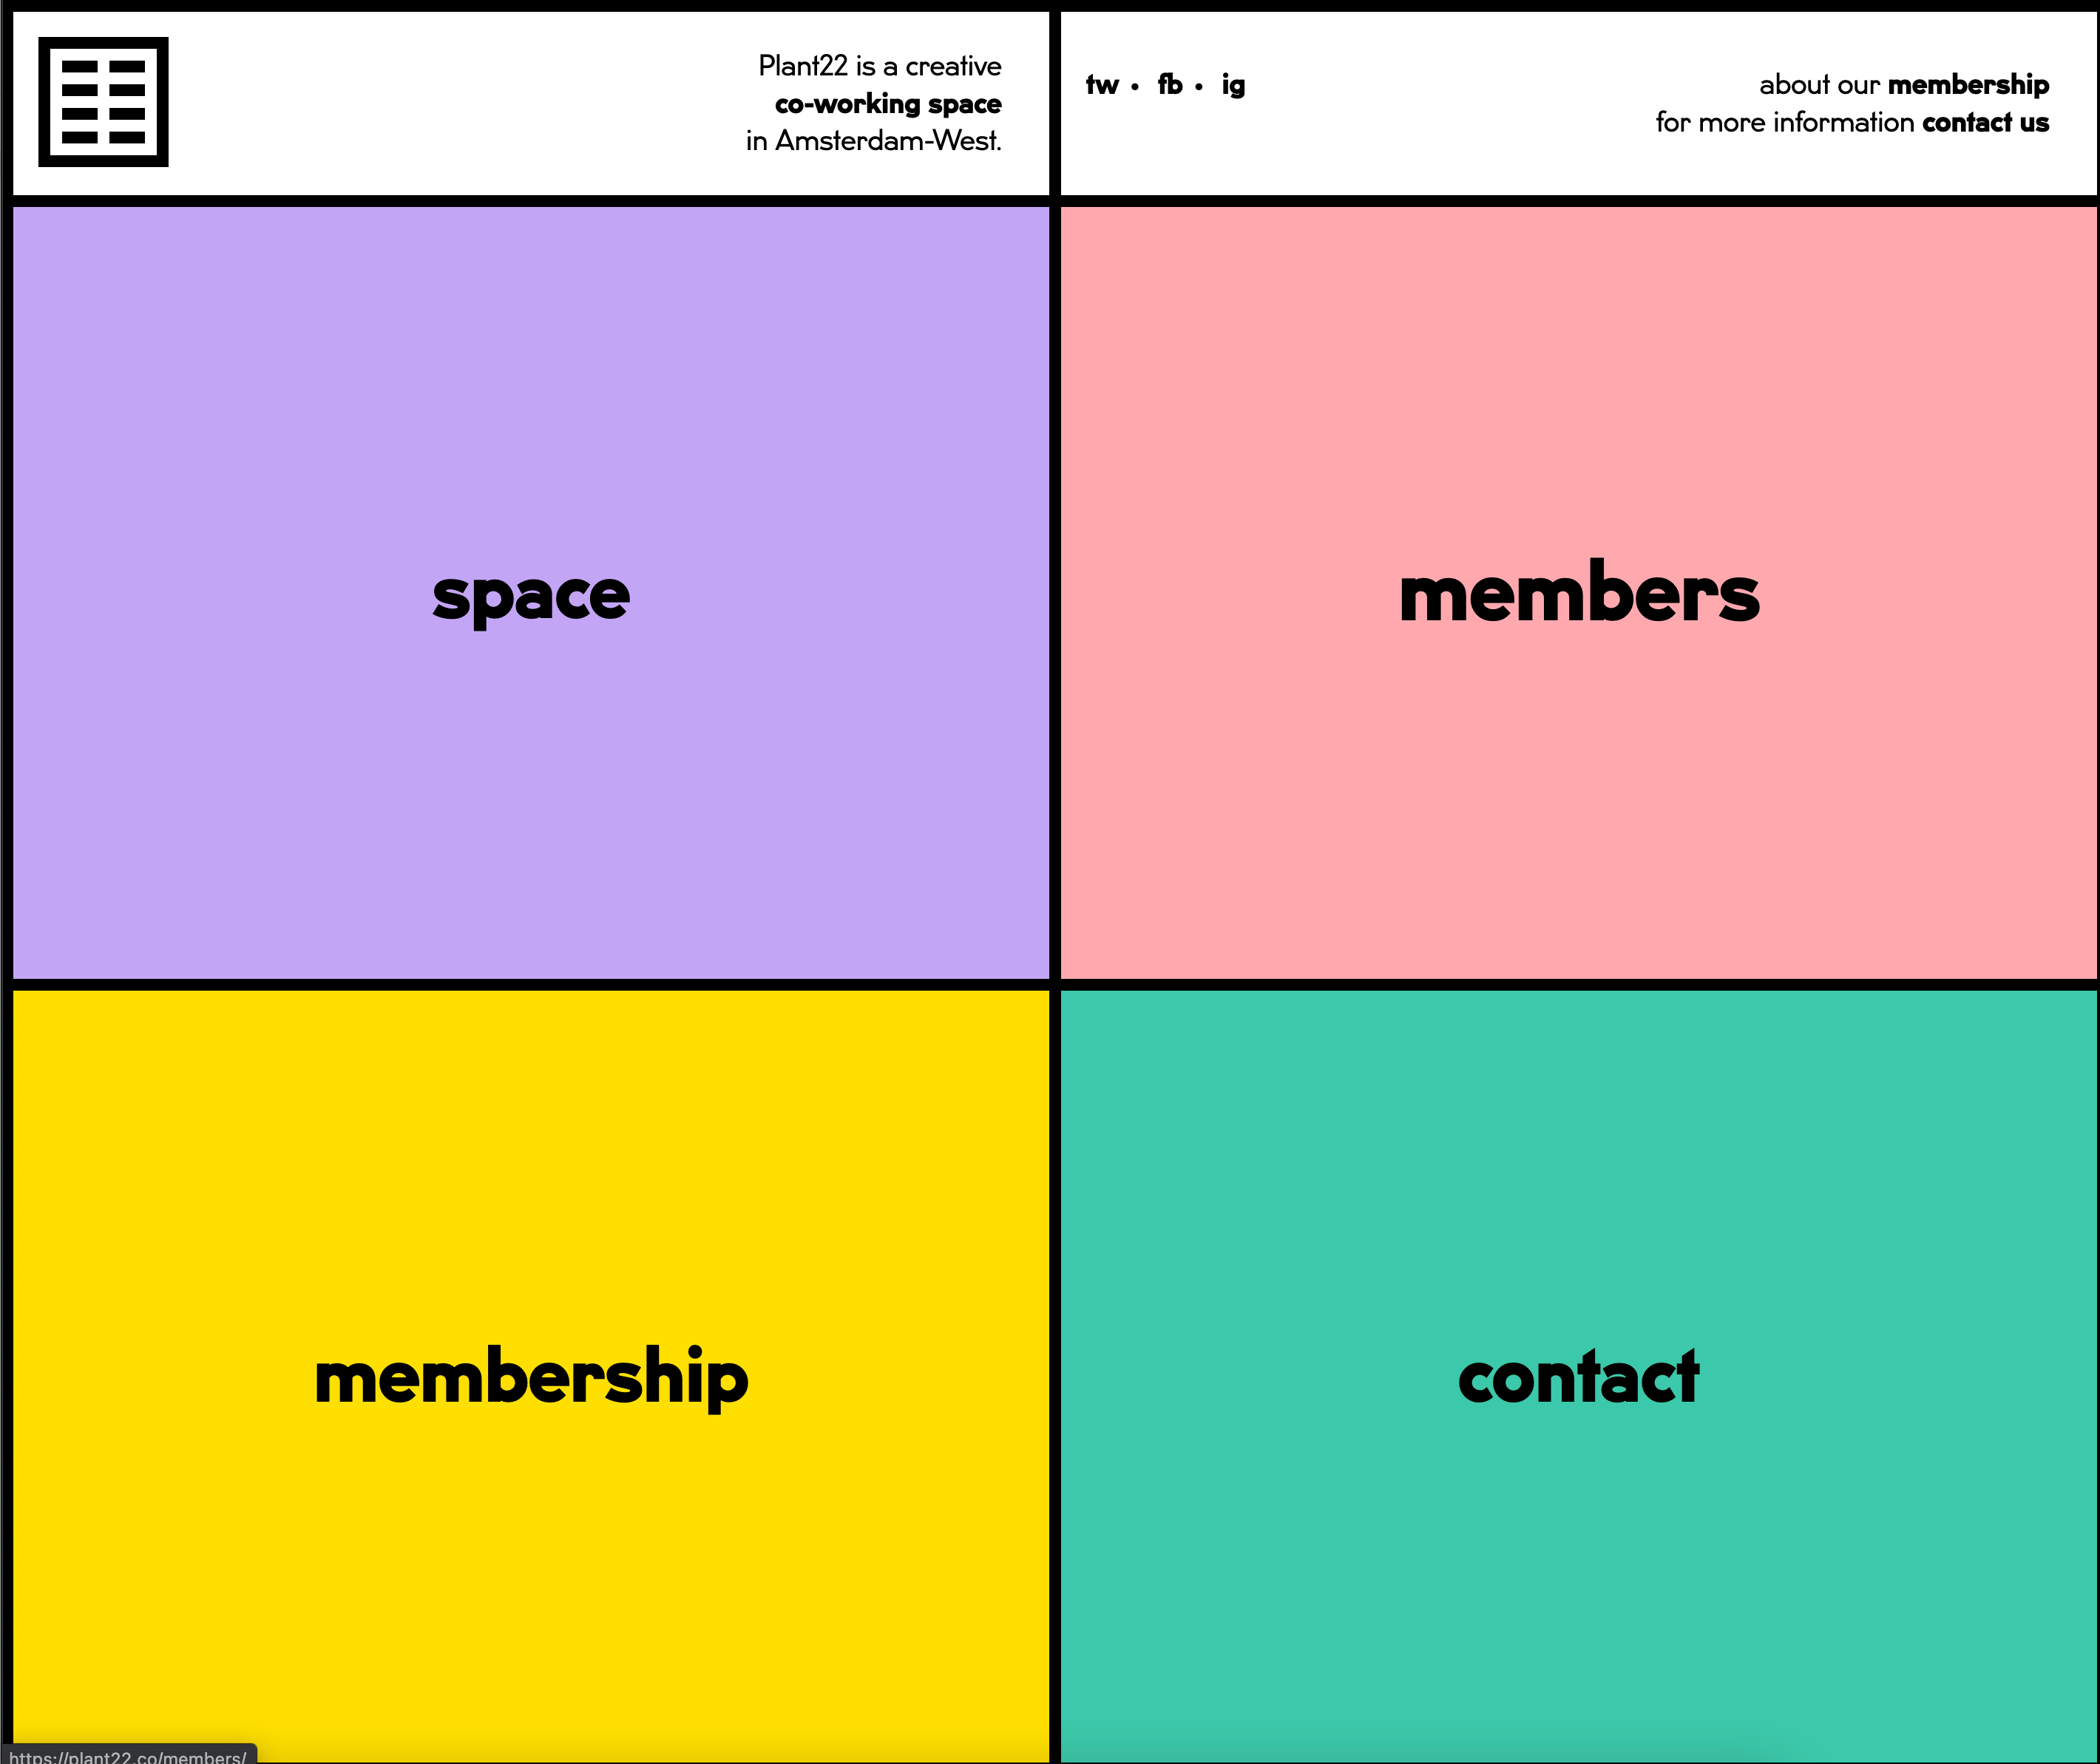 Plant22's website, which is divided into four quadrants labeled "space," "members", "membership", and "contact